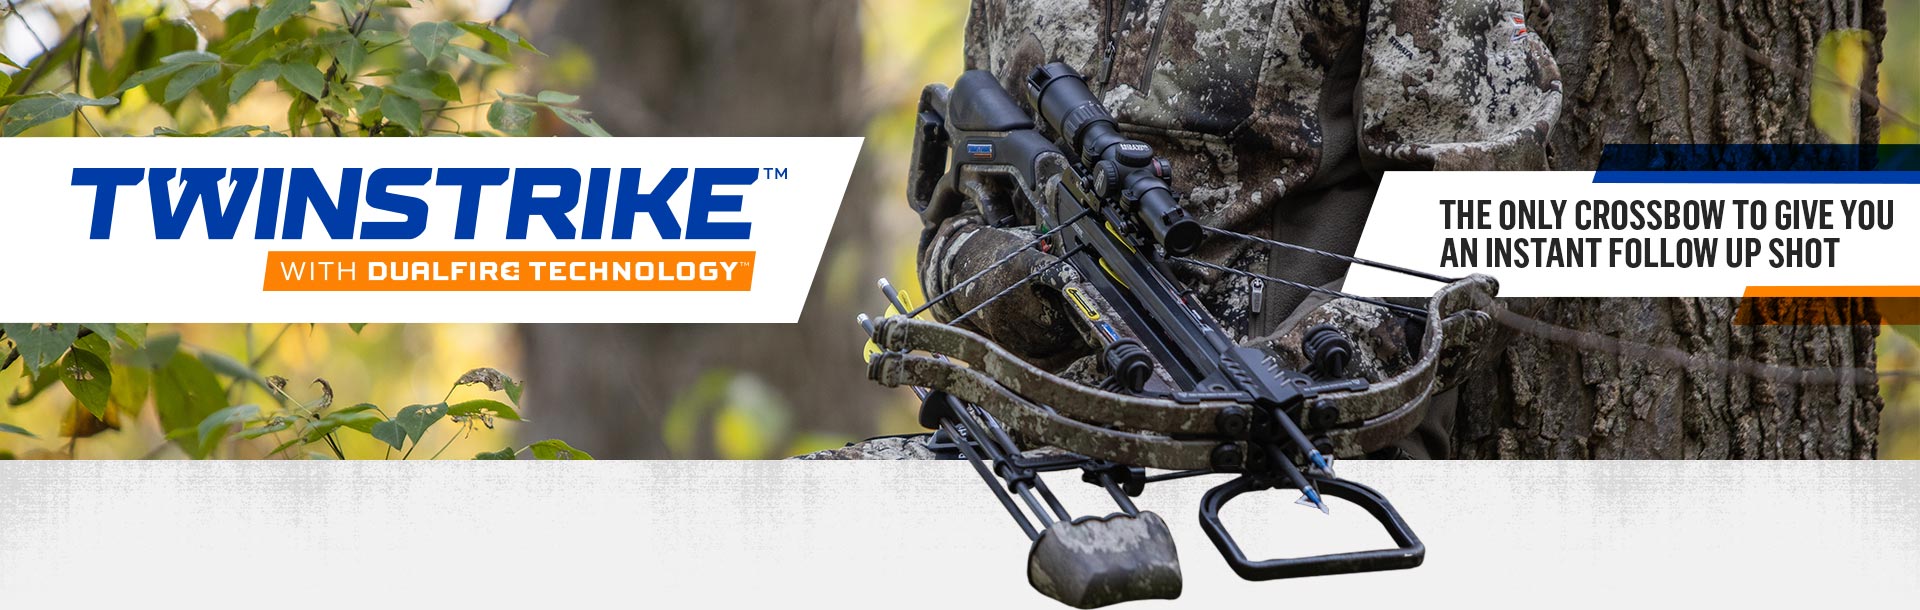 TwinStrike with DualFire Technology - The only crossbow to give you an instant follow-up shot